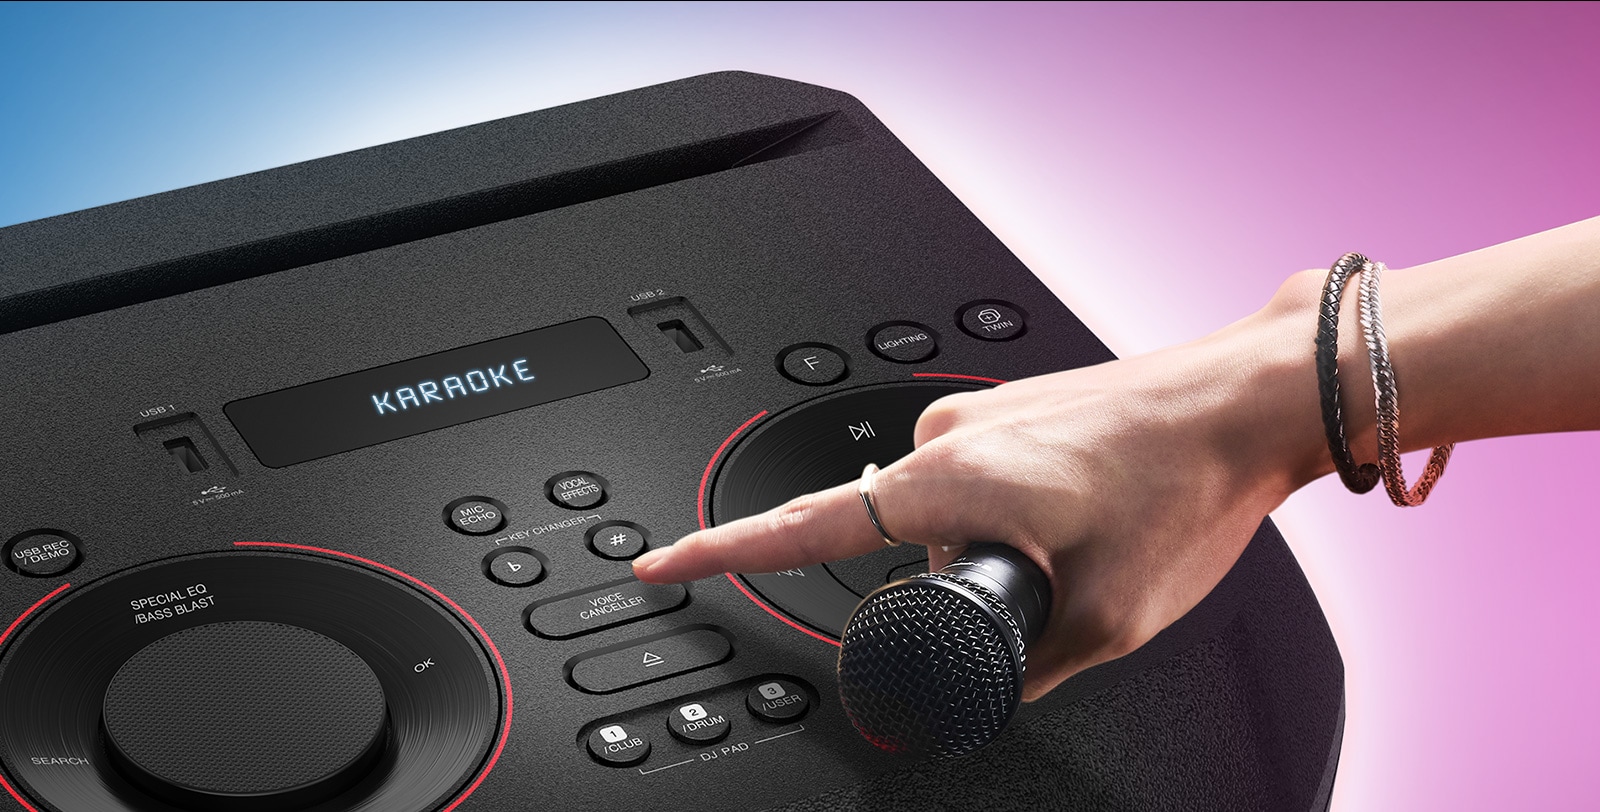 A hand holding a microphone tries to press the Voice canceller button on the top of LG XBOOM.